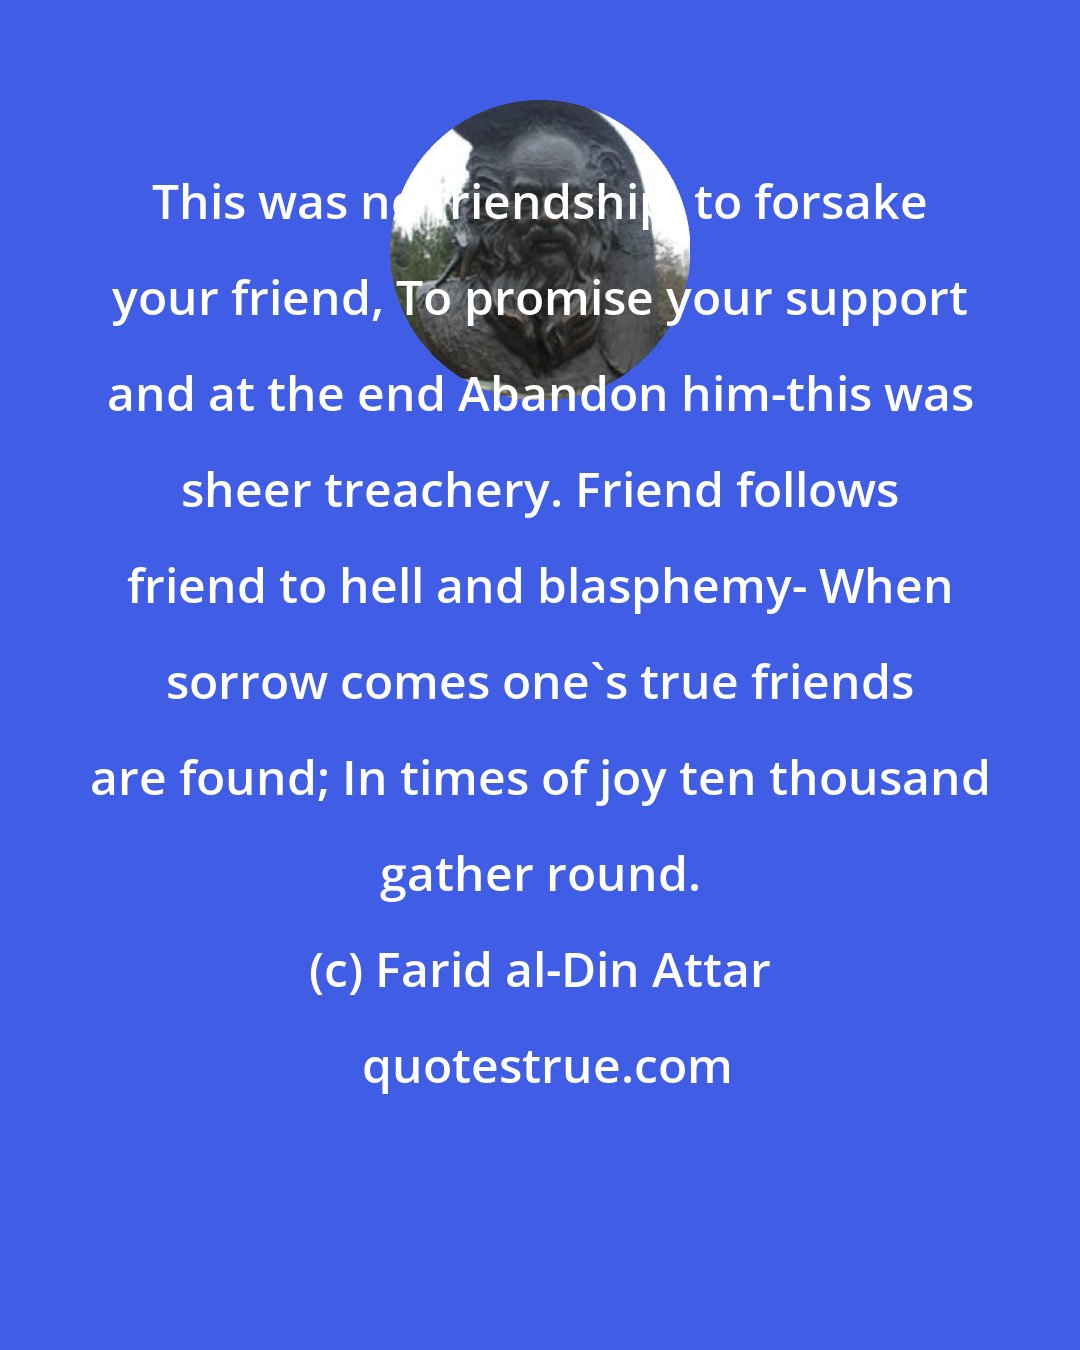 Farid al-Din Attar: This was no friendship, to forsake your friend, To promise your support and at the end Abandon him-this was sheer treachery. Friend follows friend to hell and blasphemy- When sorrow comes one's true friends are found; In times of joy ten thousand gather round.